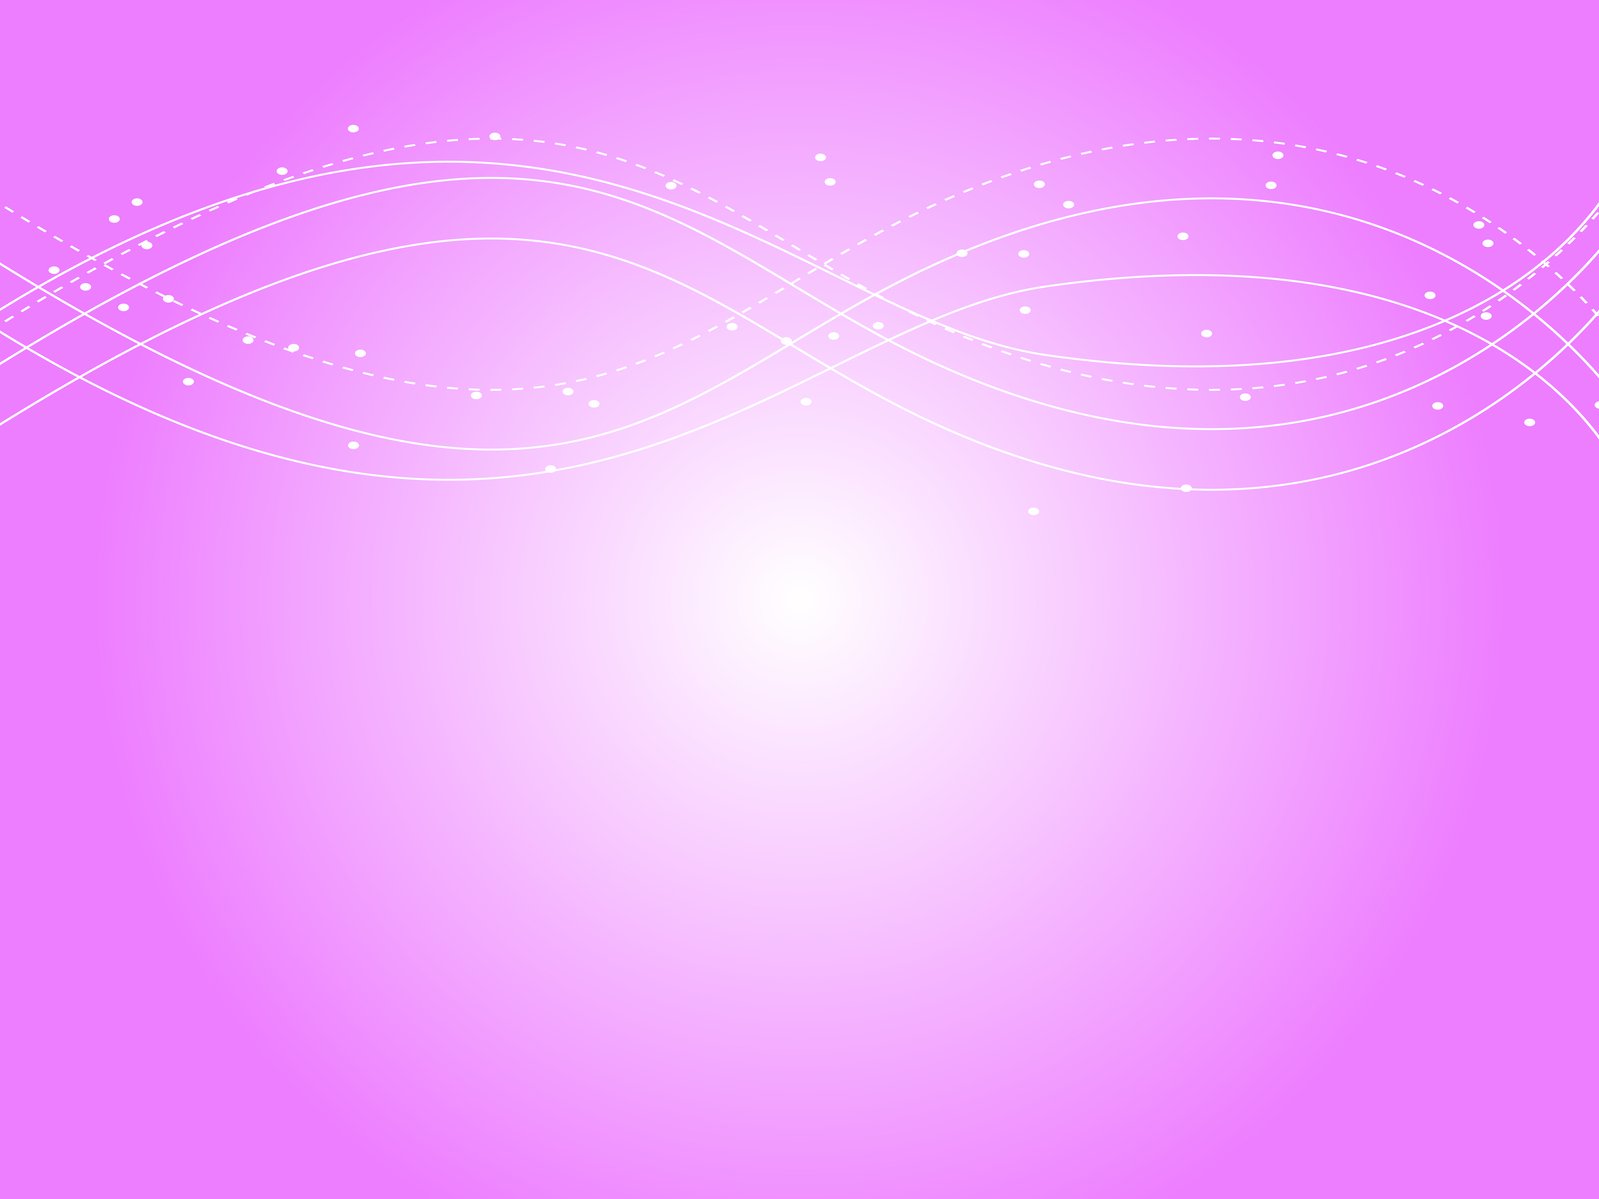 this is a po of a pink background with a pattern